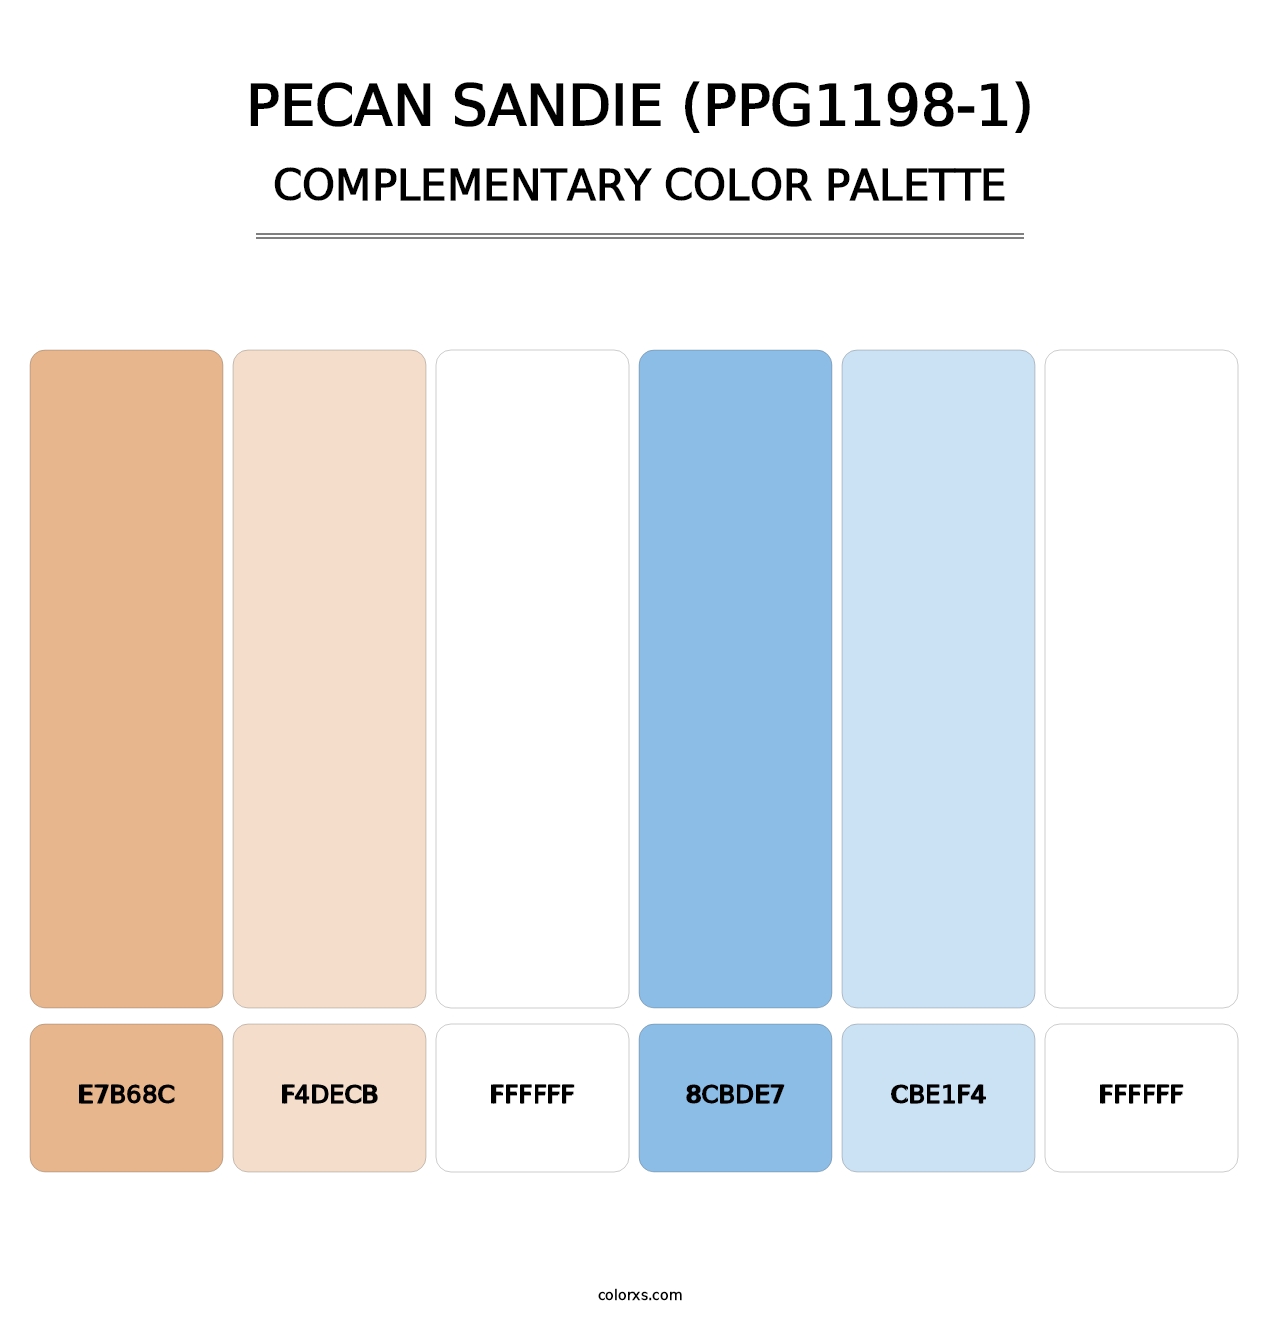 Pecan Sandie (PPG1198-1) - Complementary Color Palette